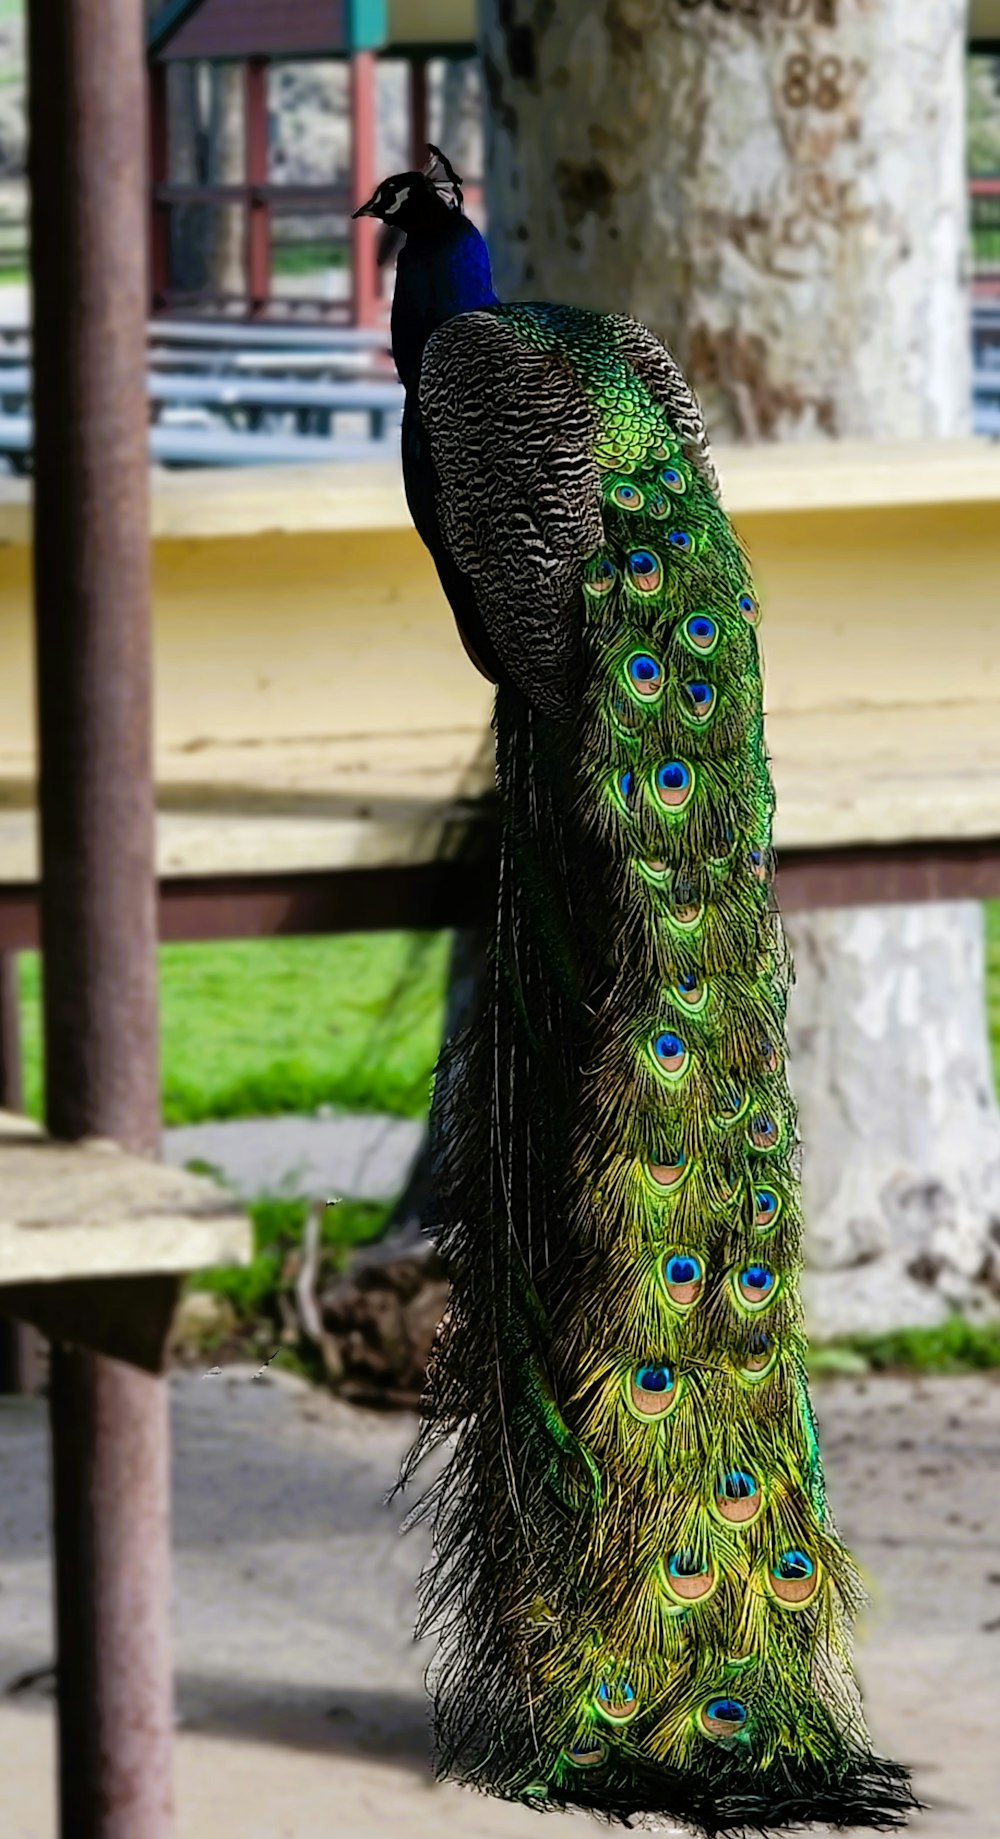 a peacock standing on top of a wooden bench